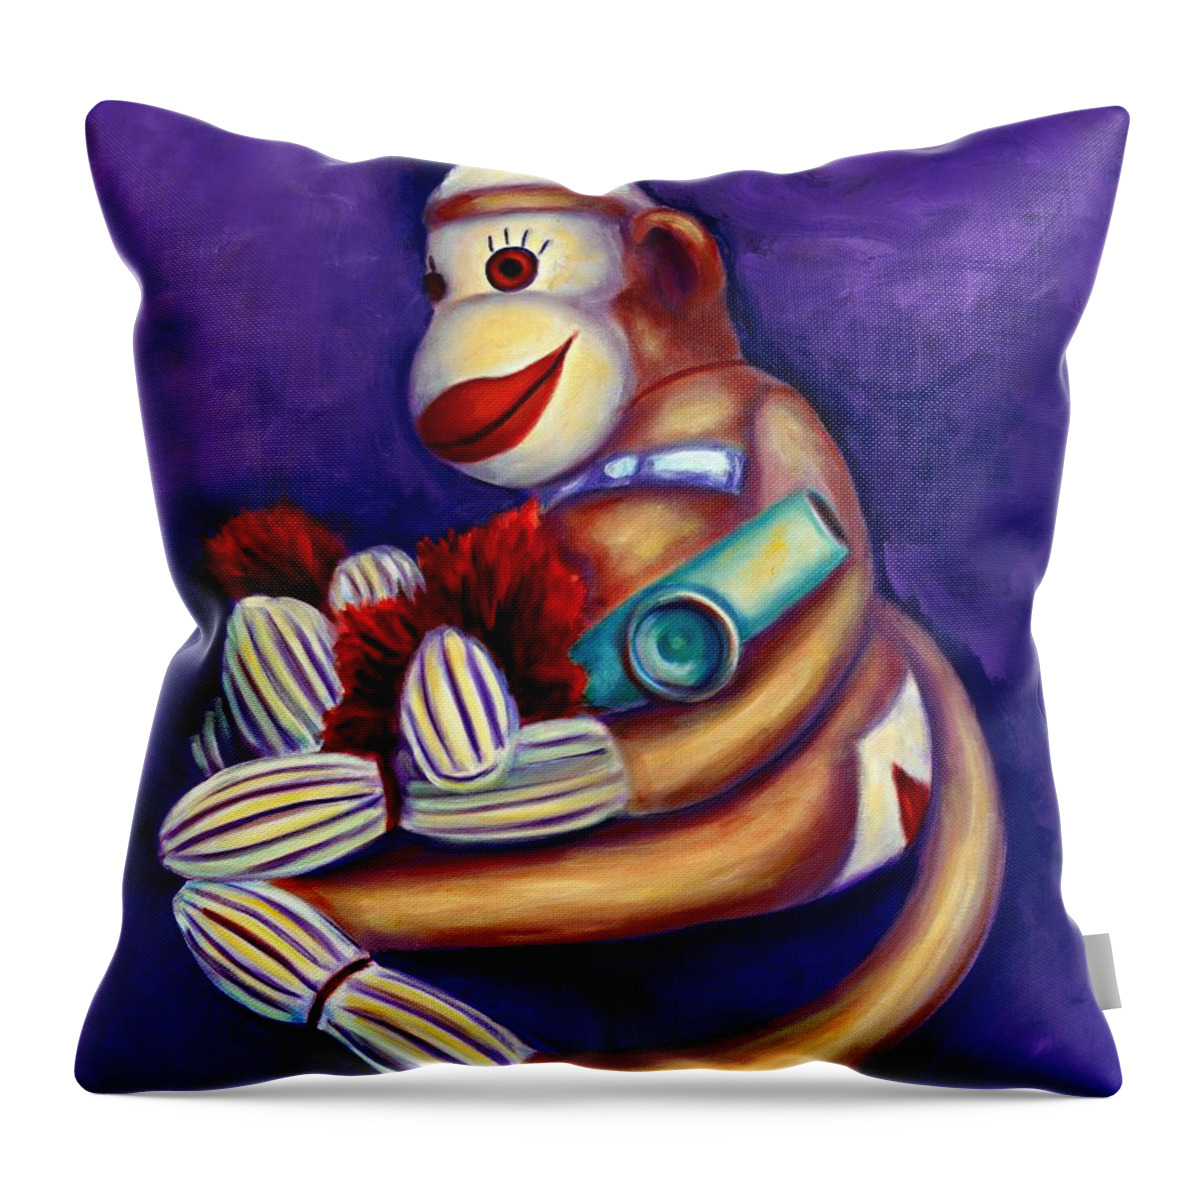 Children Throw Pillow featuring the painting Sock Monkey With Kazoo by Shannon Grissom